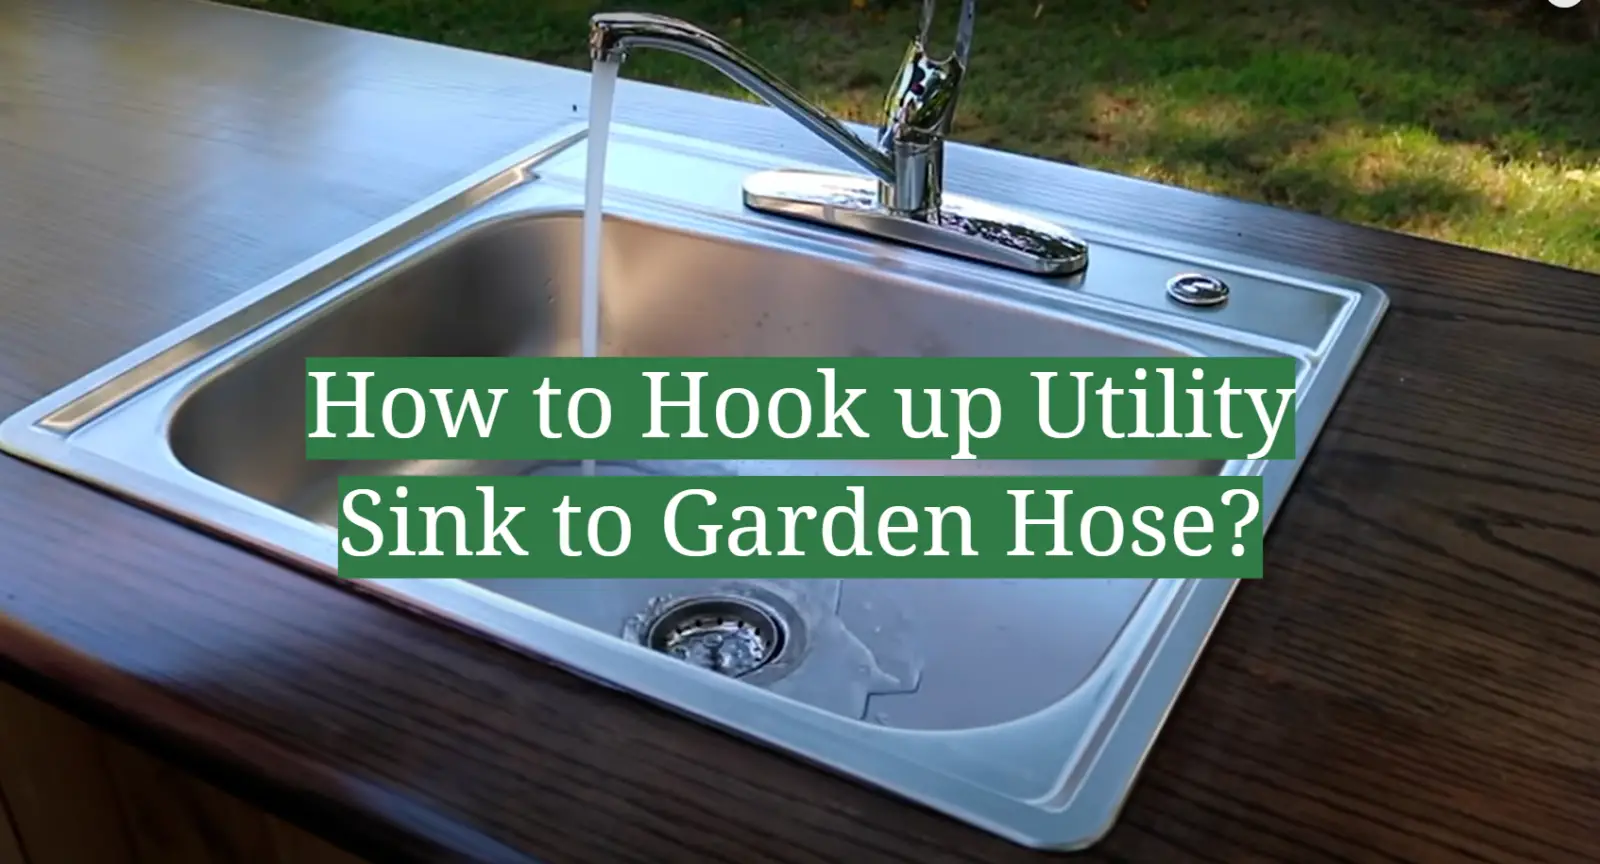 How to Hook up Utility Sink to Garden Hose?